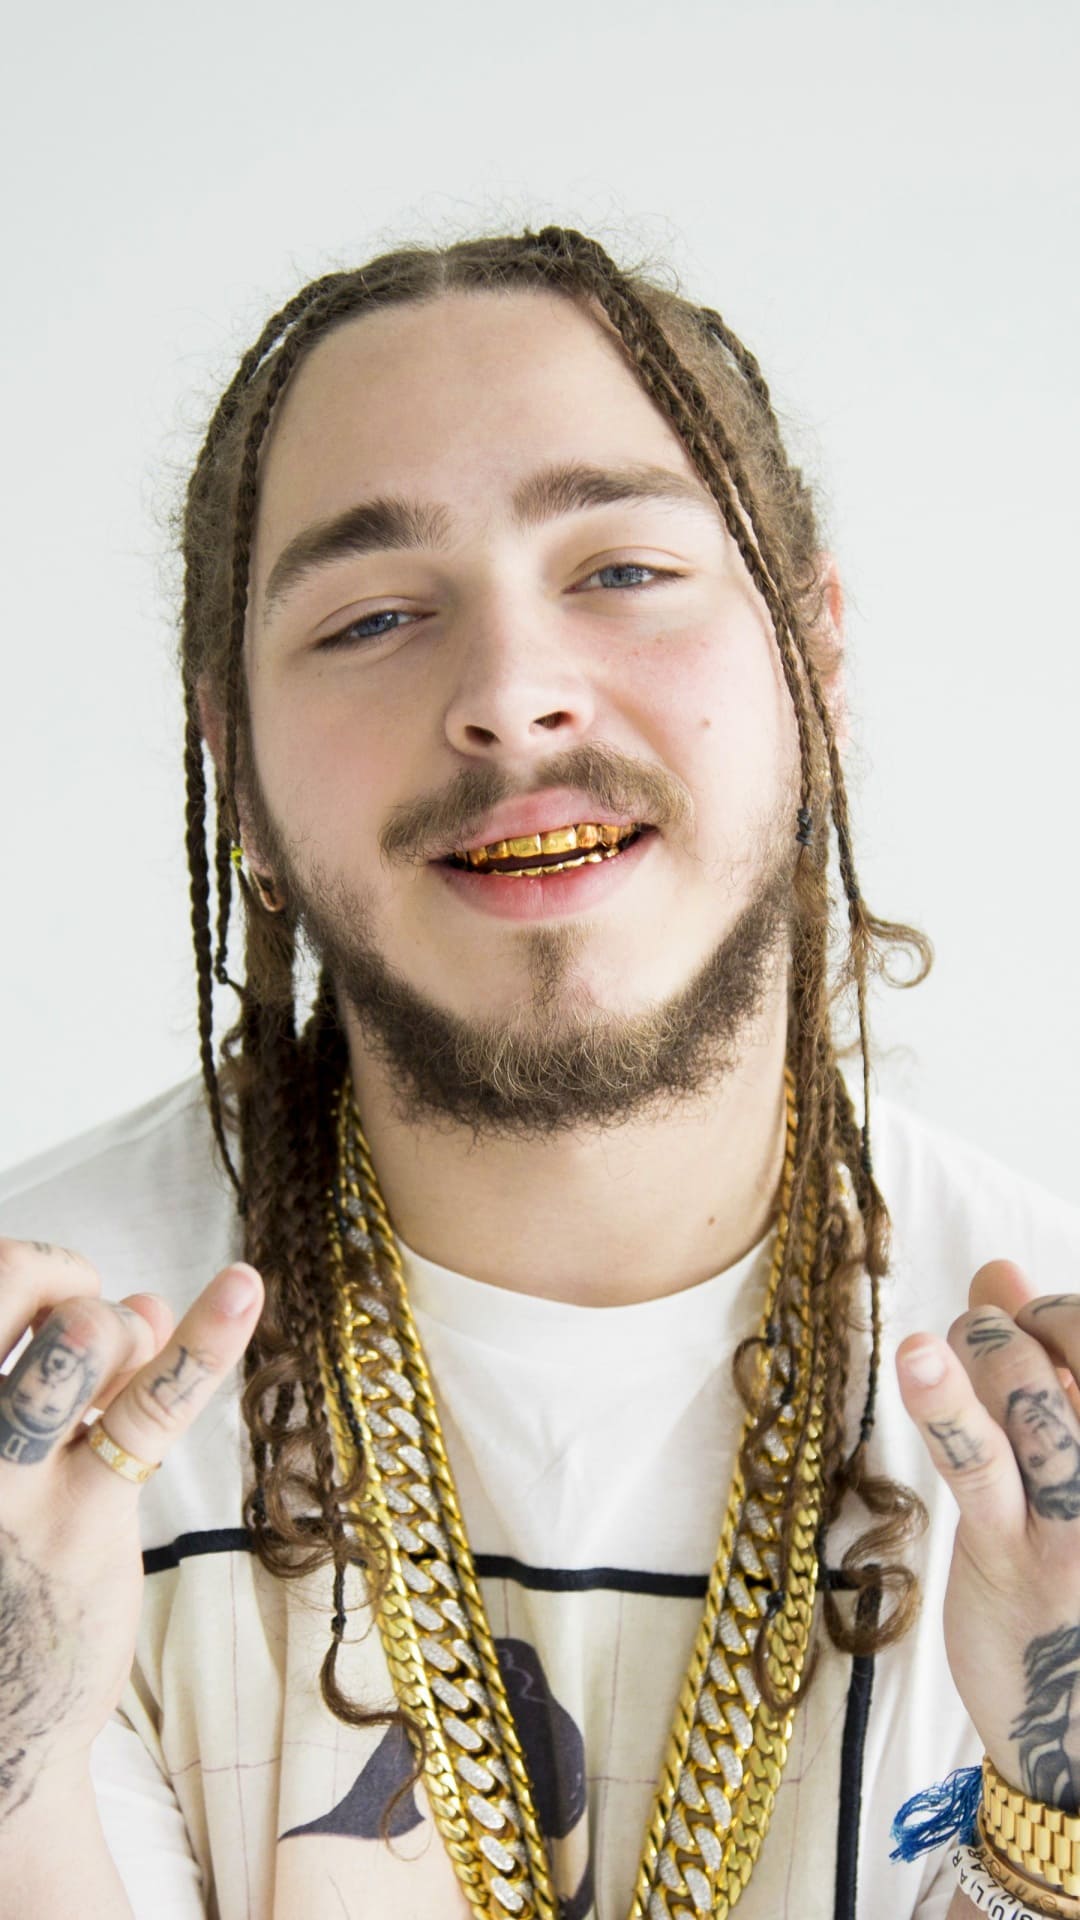 Post Malone Wallpapers